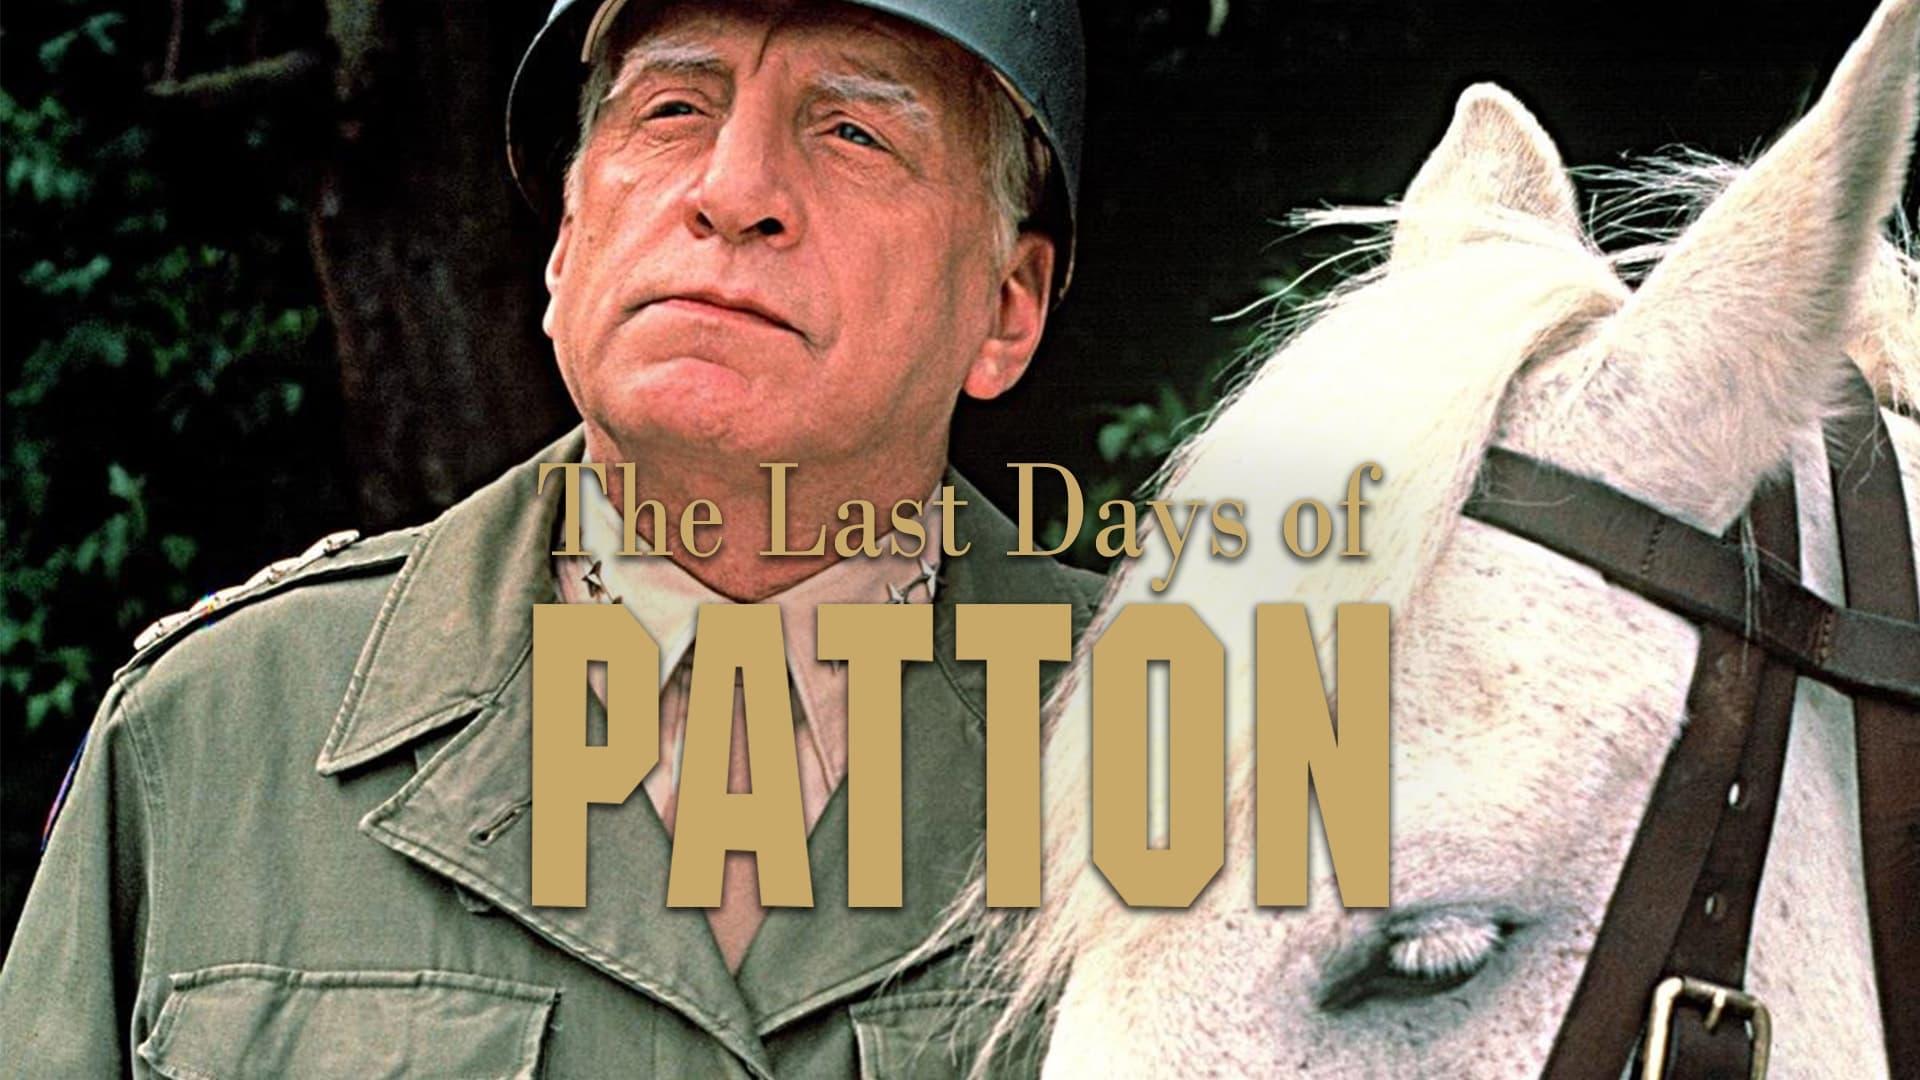 The Last Days of Patton backdrop